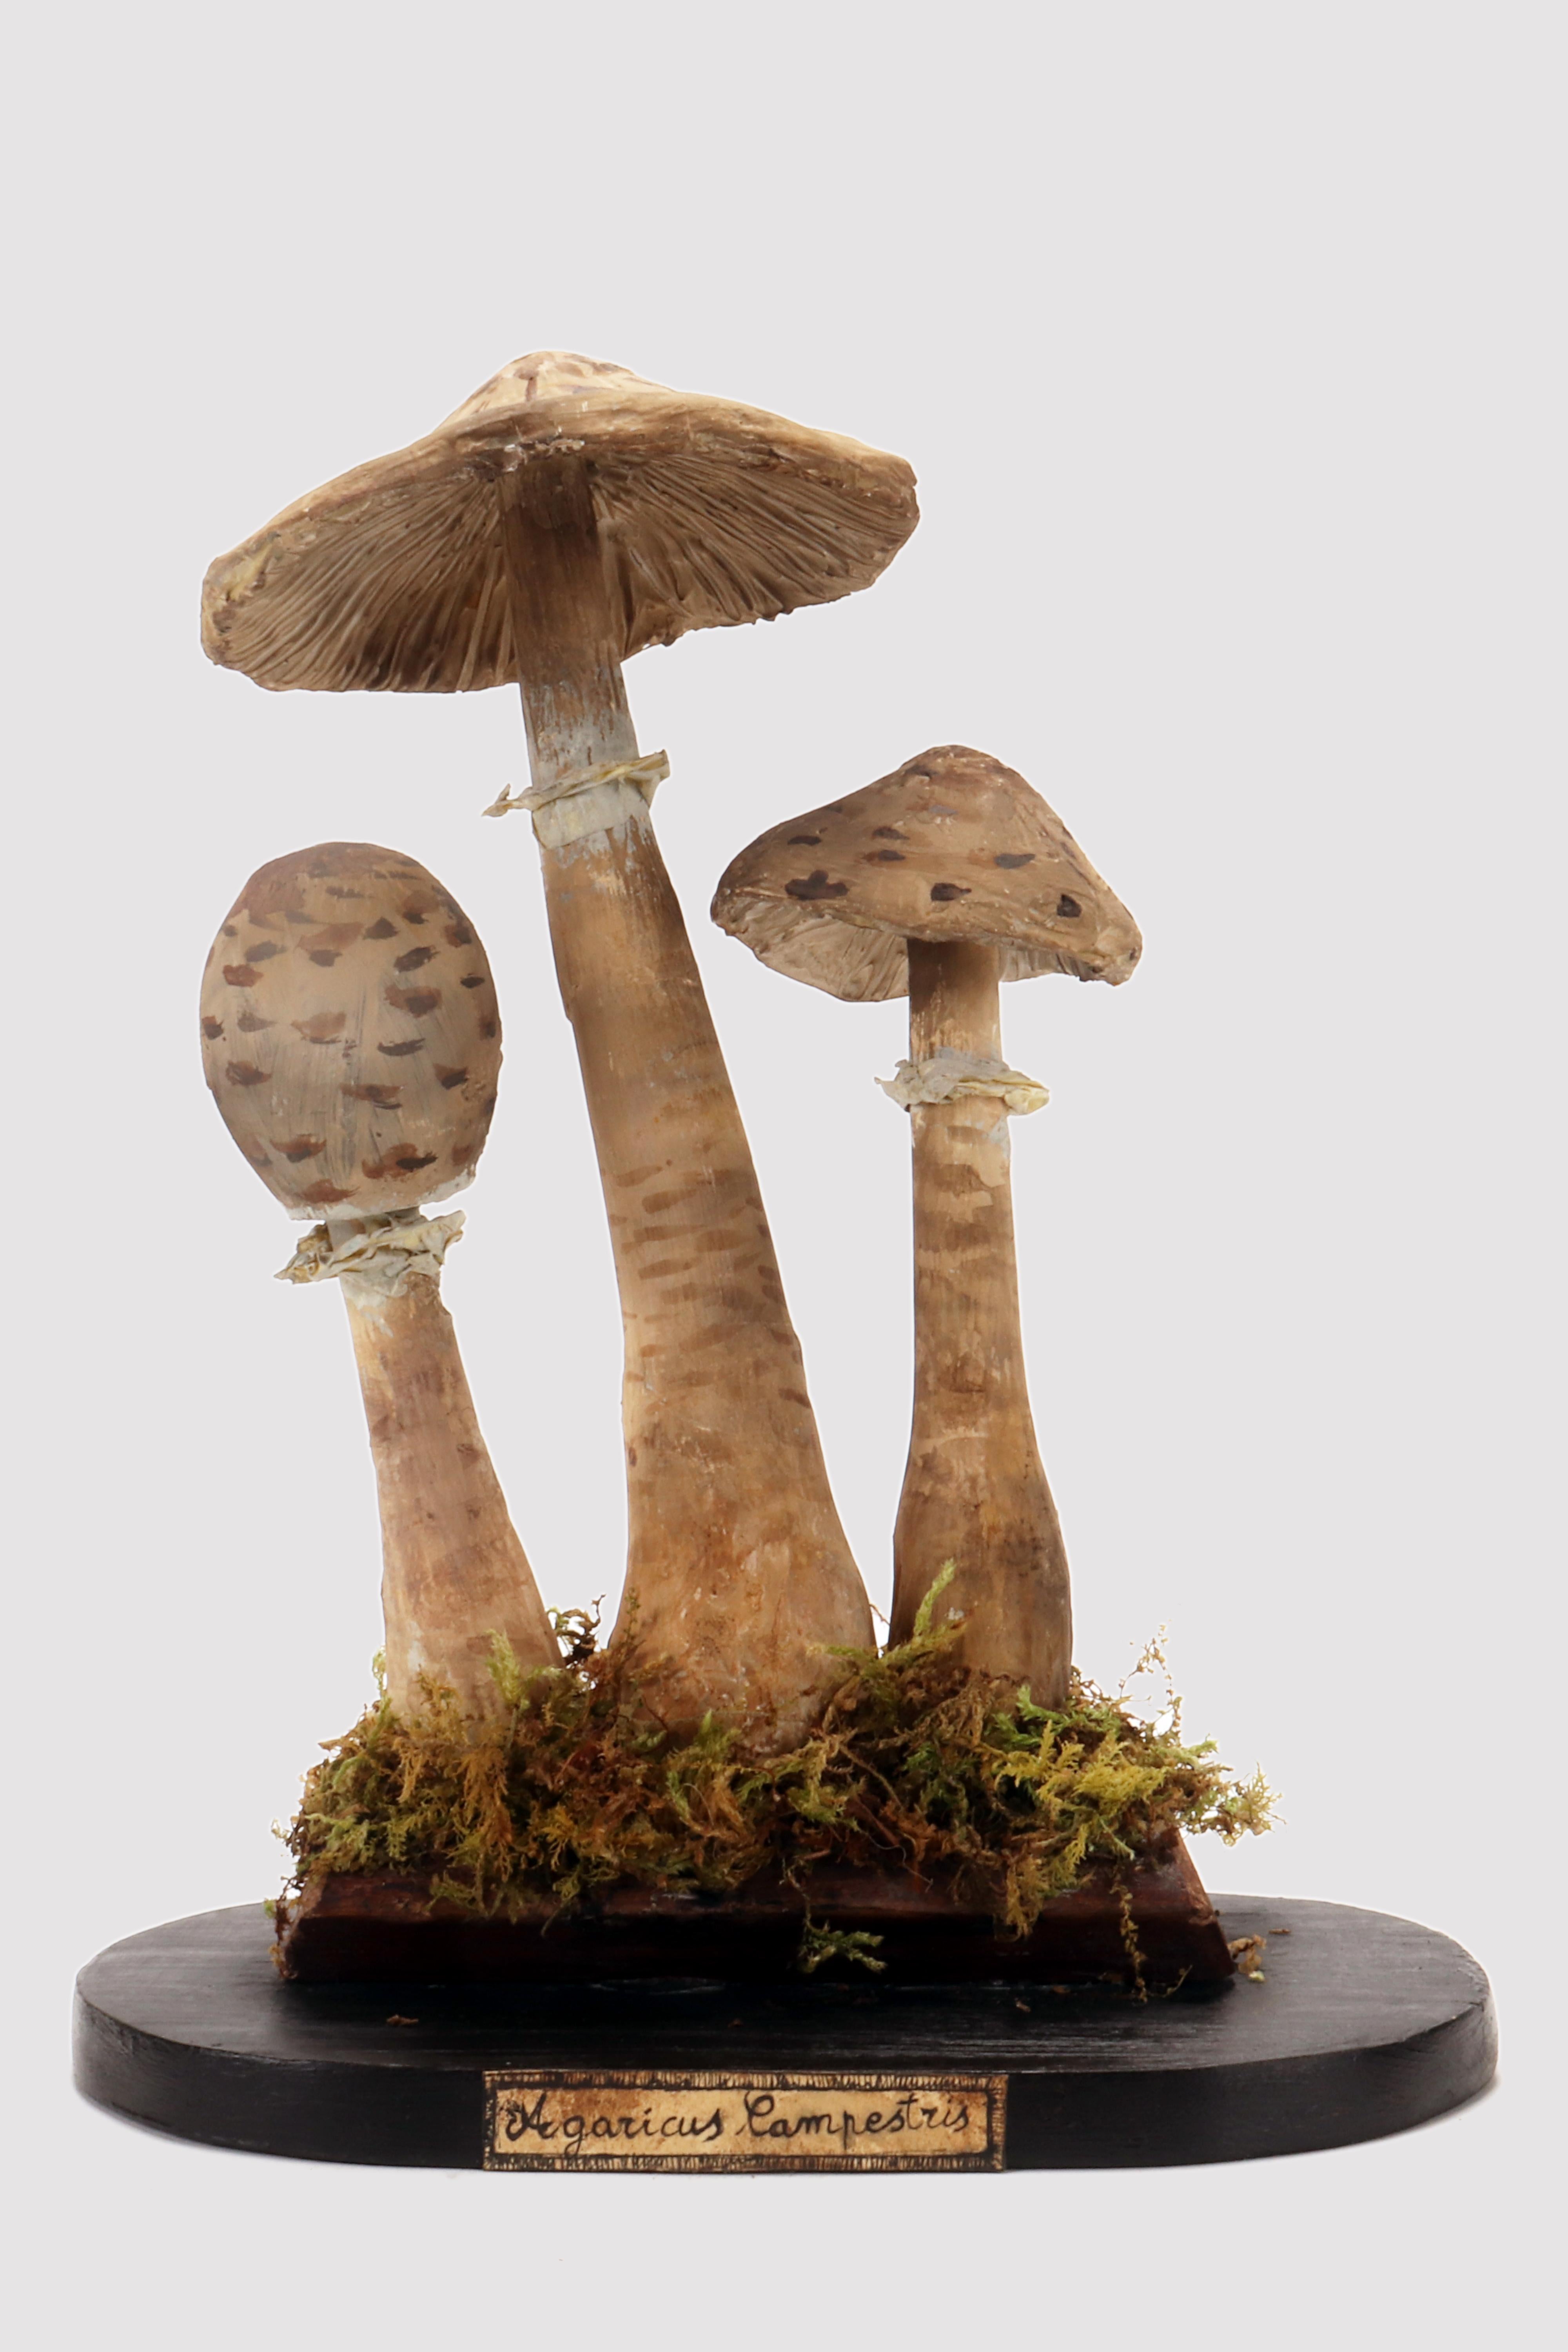 A model for pharmacy of mushrooms. Specimen  Agaricus Campestris, Made out of paper machè watercolored. Rectangular wooden black base with moss and hay. Germany circa 1890. 